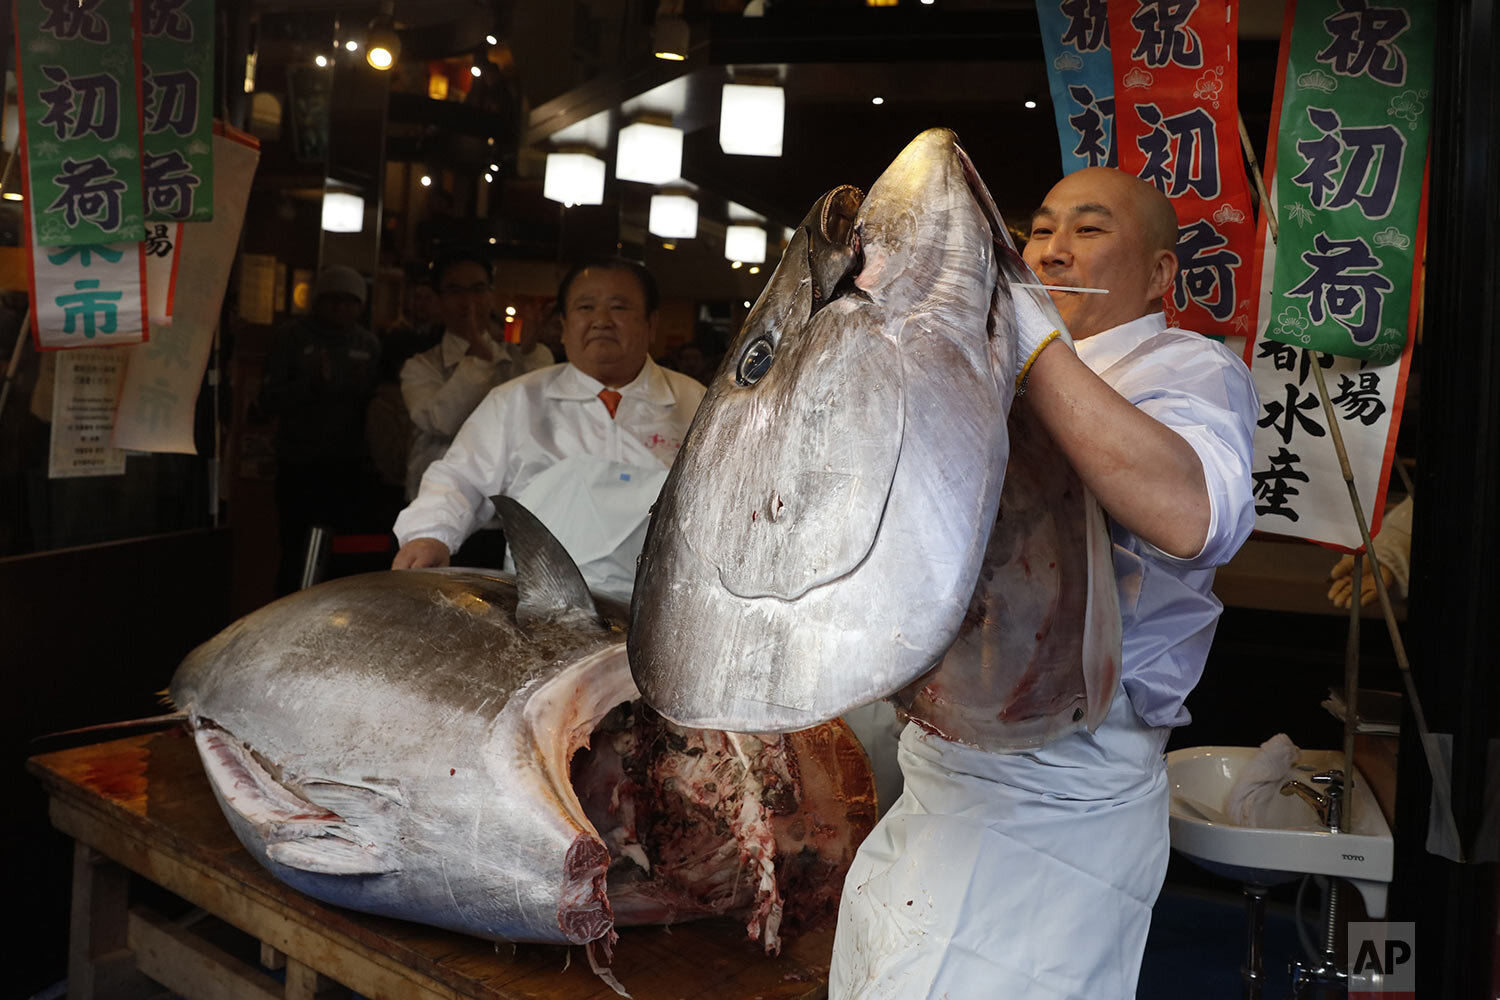  A sushi chef holds up the head of a bluefin tuna at a restaurant in Tsukji market area in Tokyo, after it was sold at the first auction of 2020 at Tokyo's Toyosu fish market, Sunday, Jan. 5, 2020. (AP Photo/Jae C. Hong) 